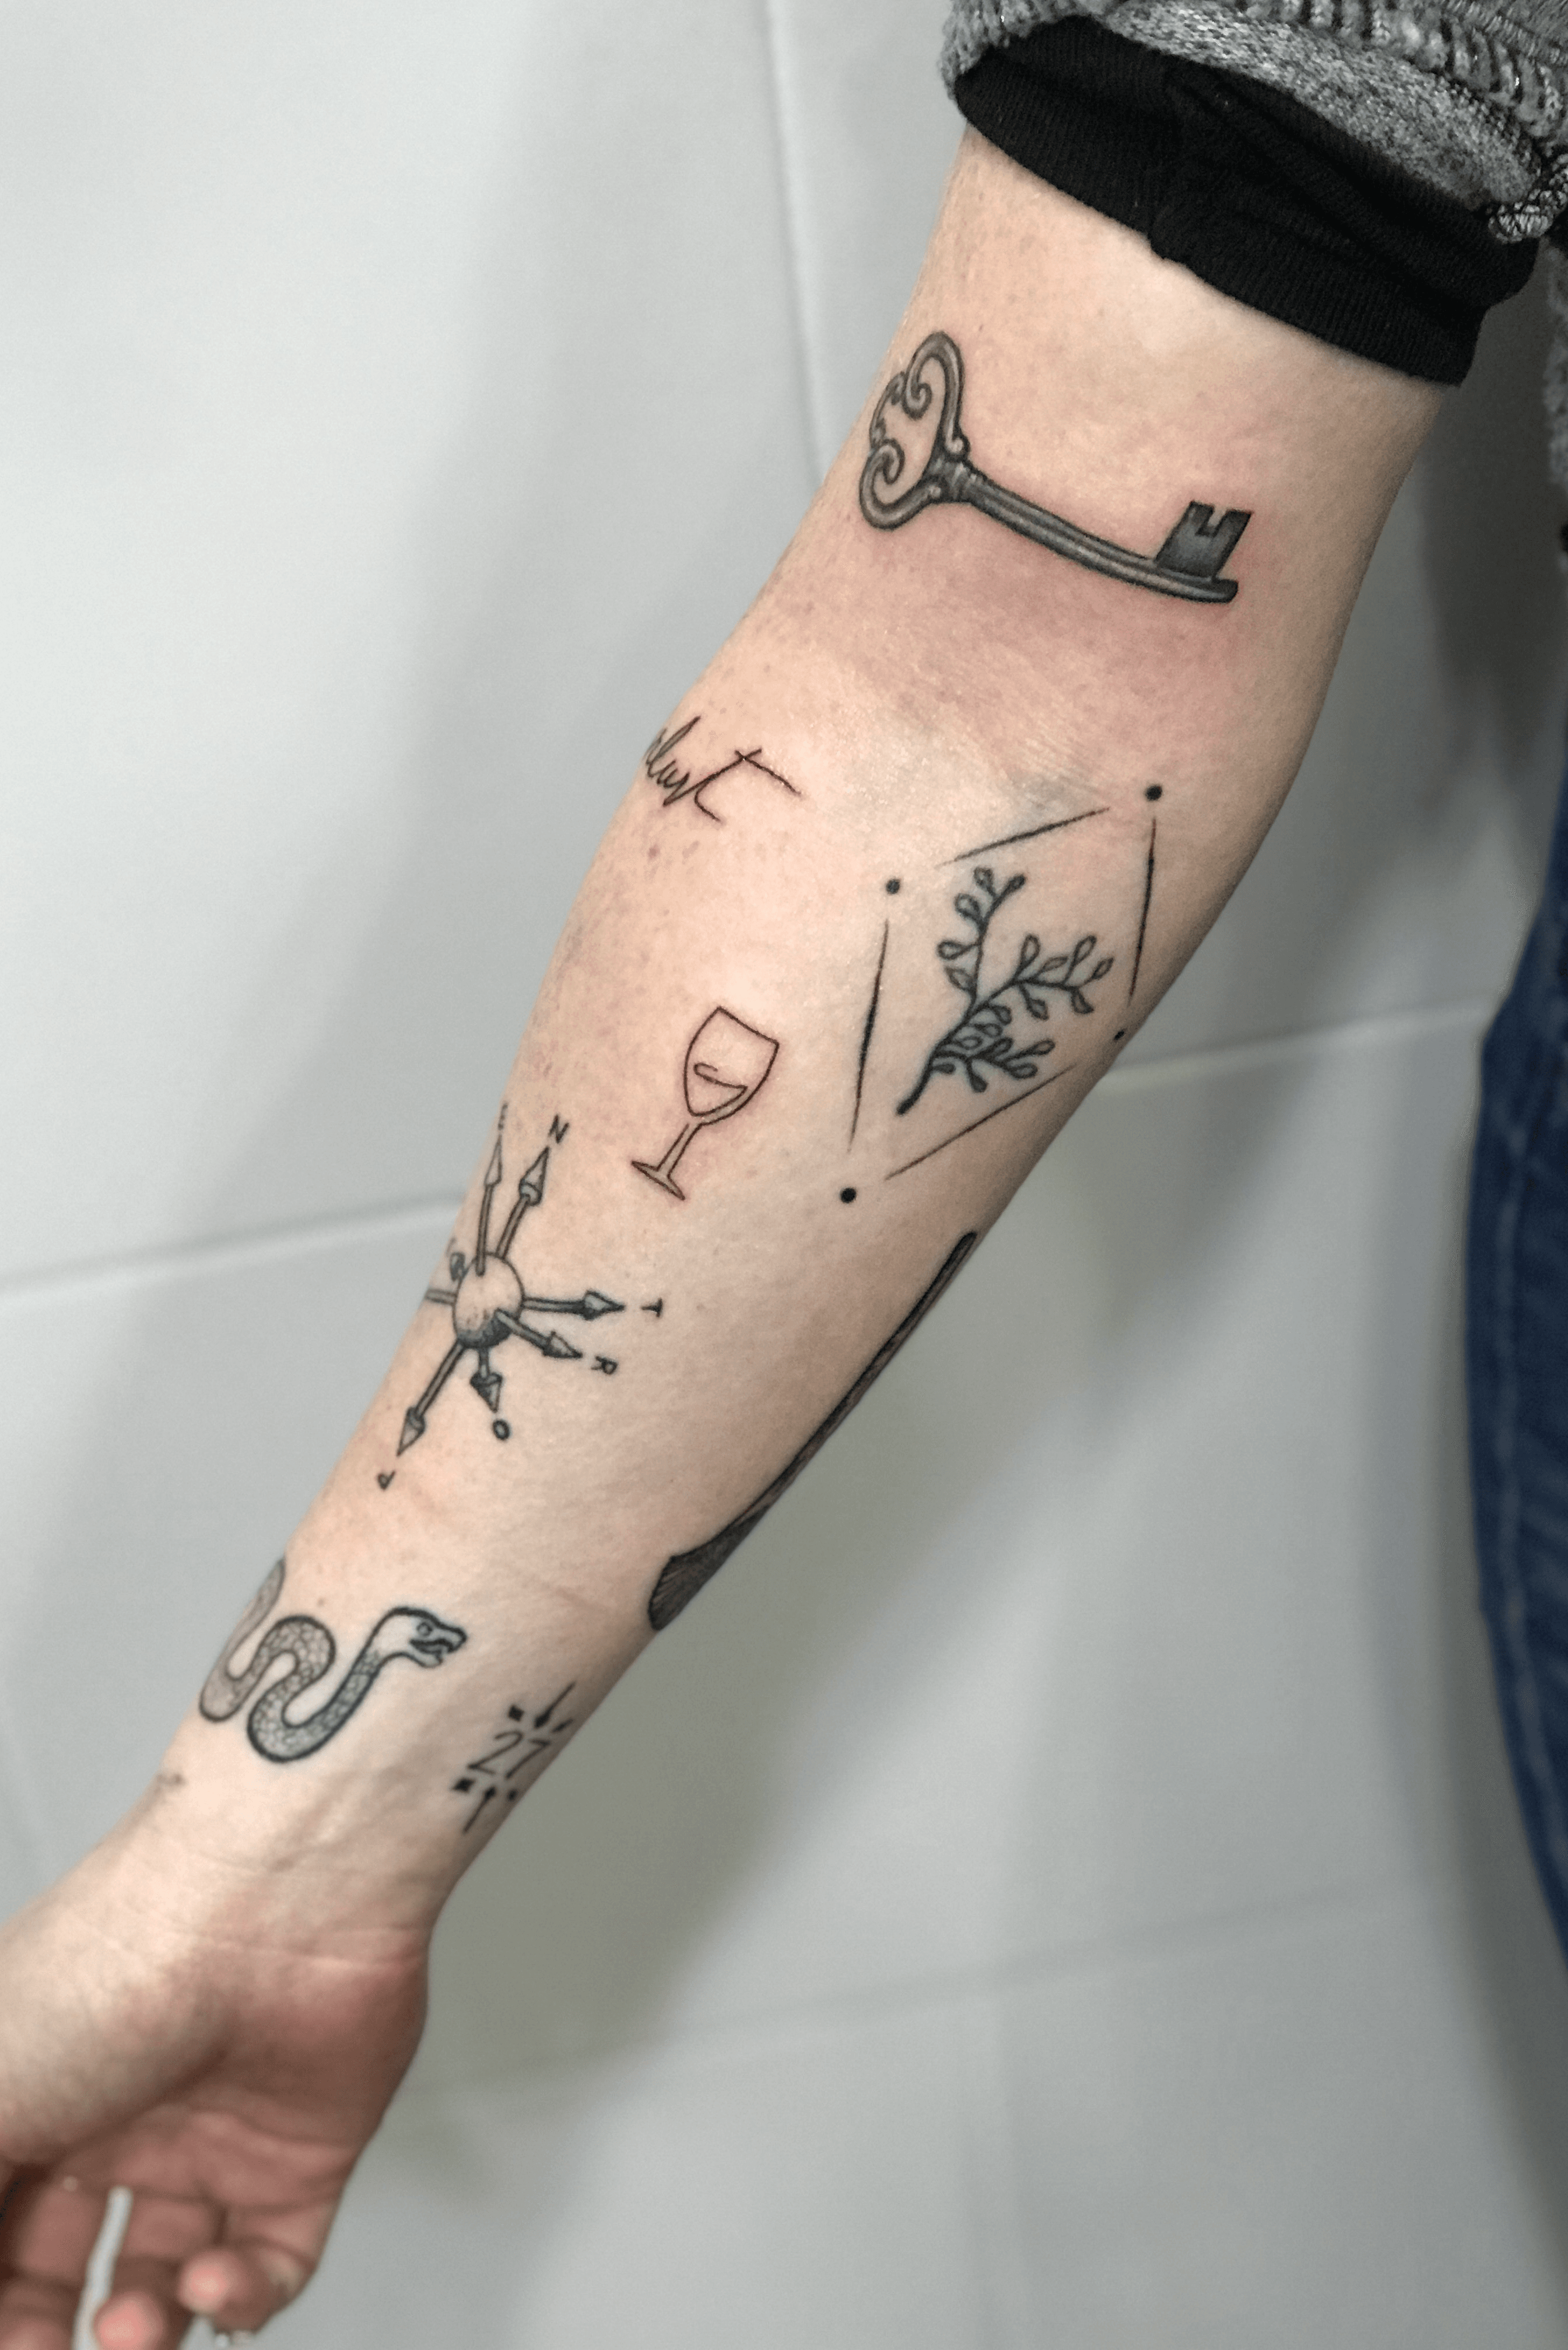 Amazing Minimal Tattoo Ideas For Men and Women  A Listly List